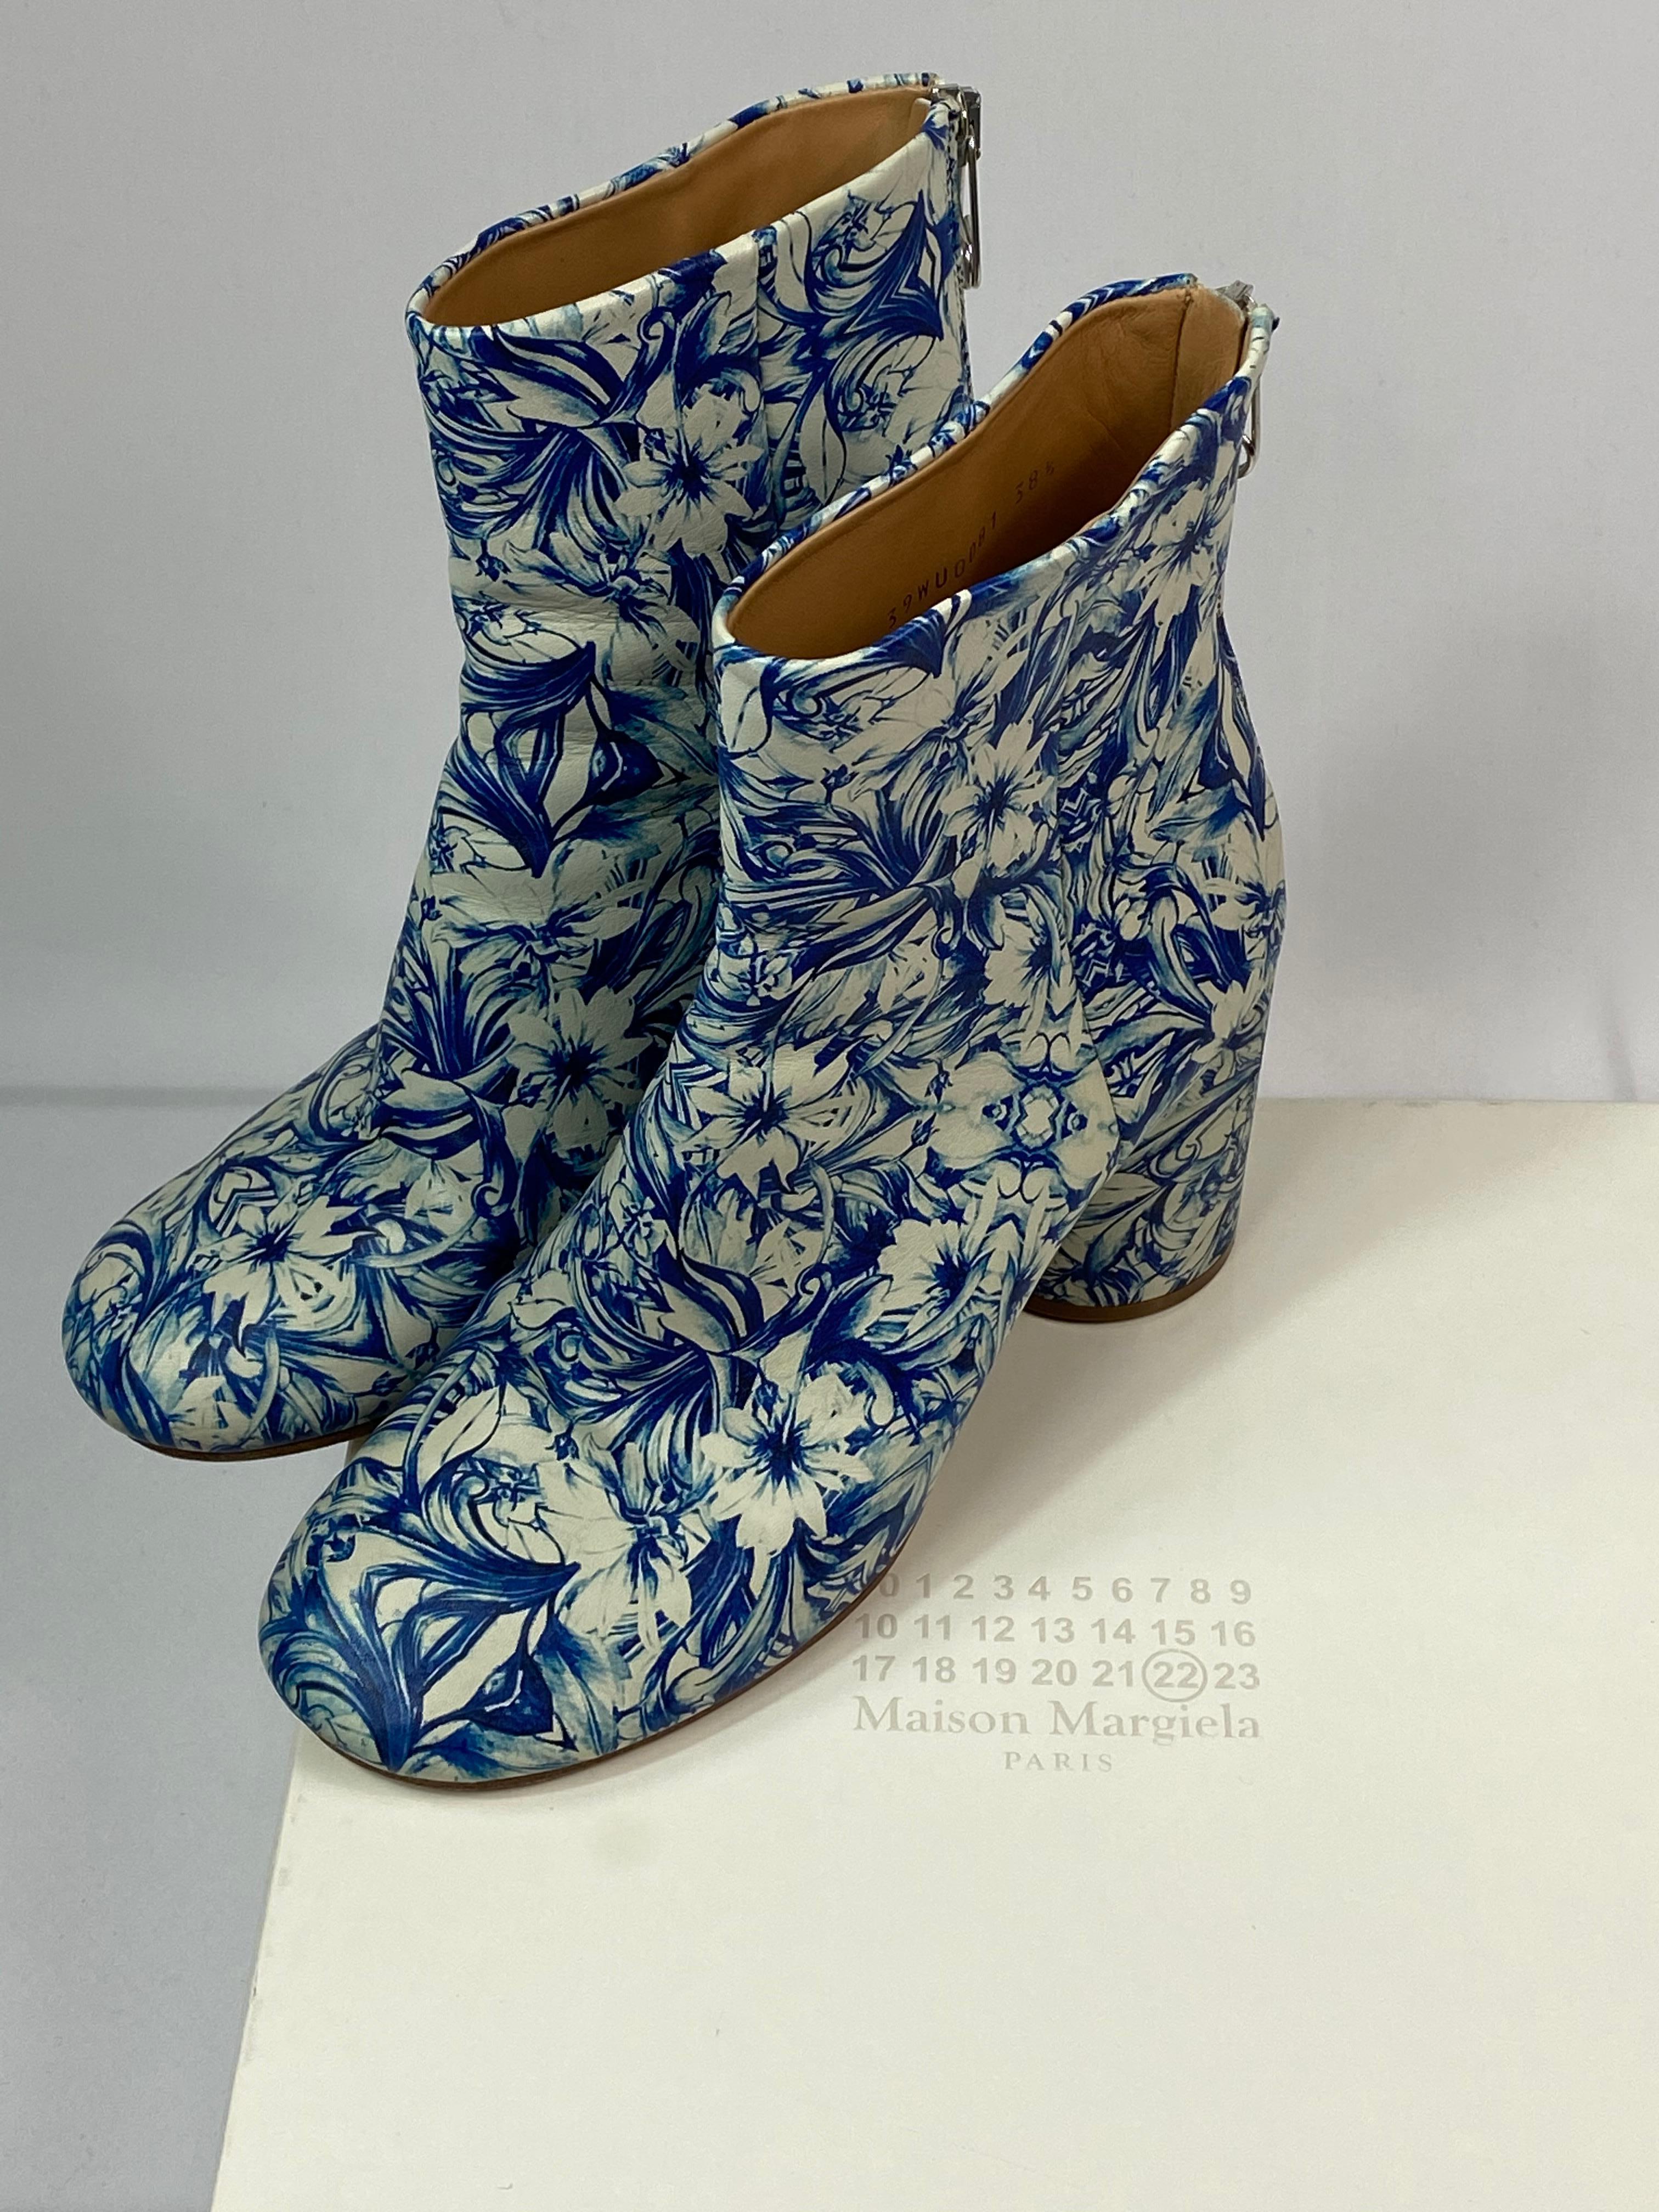 MAISON MARGIELA White and Blue Floral Print Leather Block Heel Booties SIZE 38.5 1